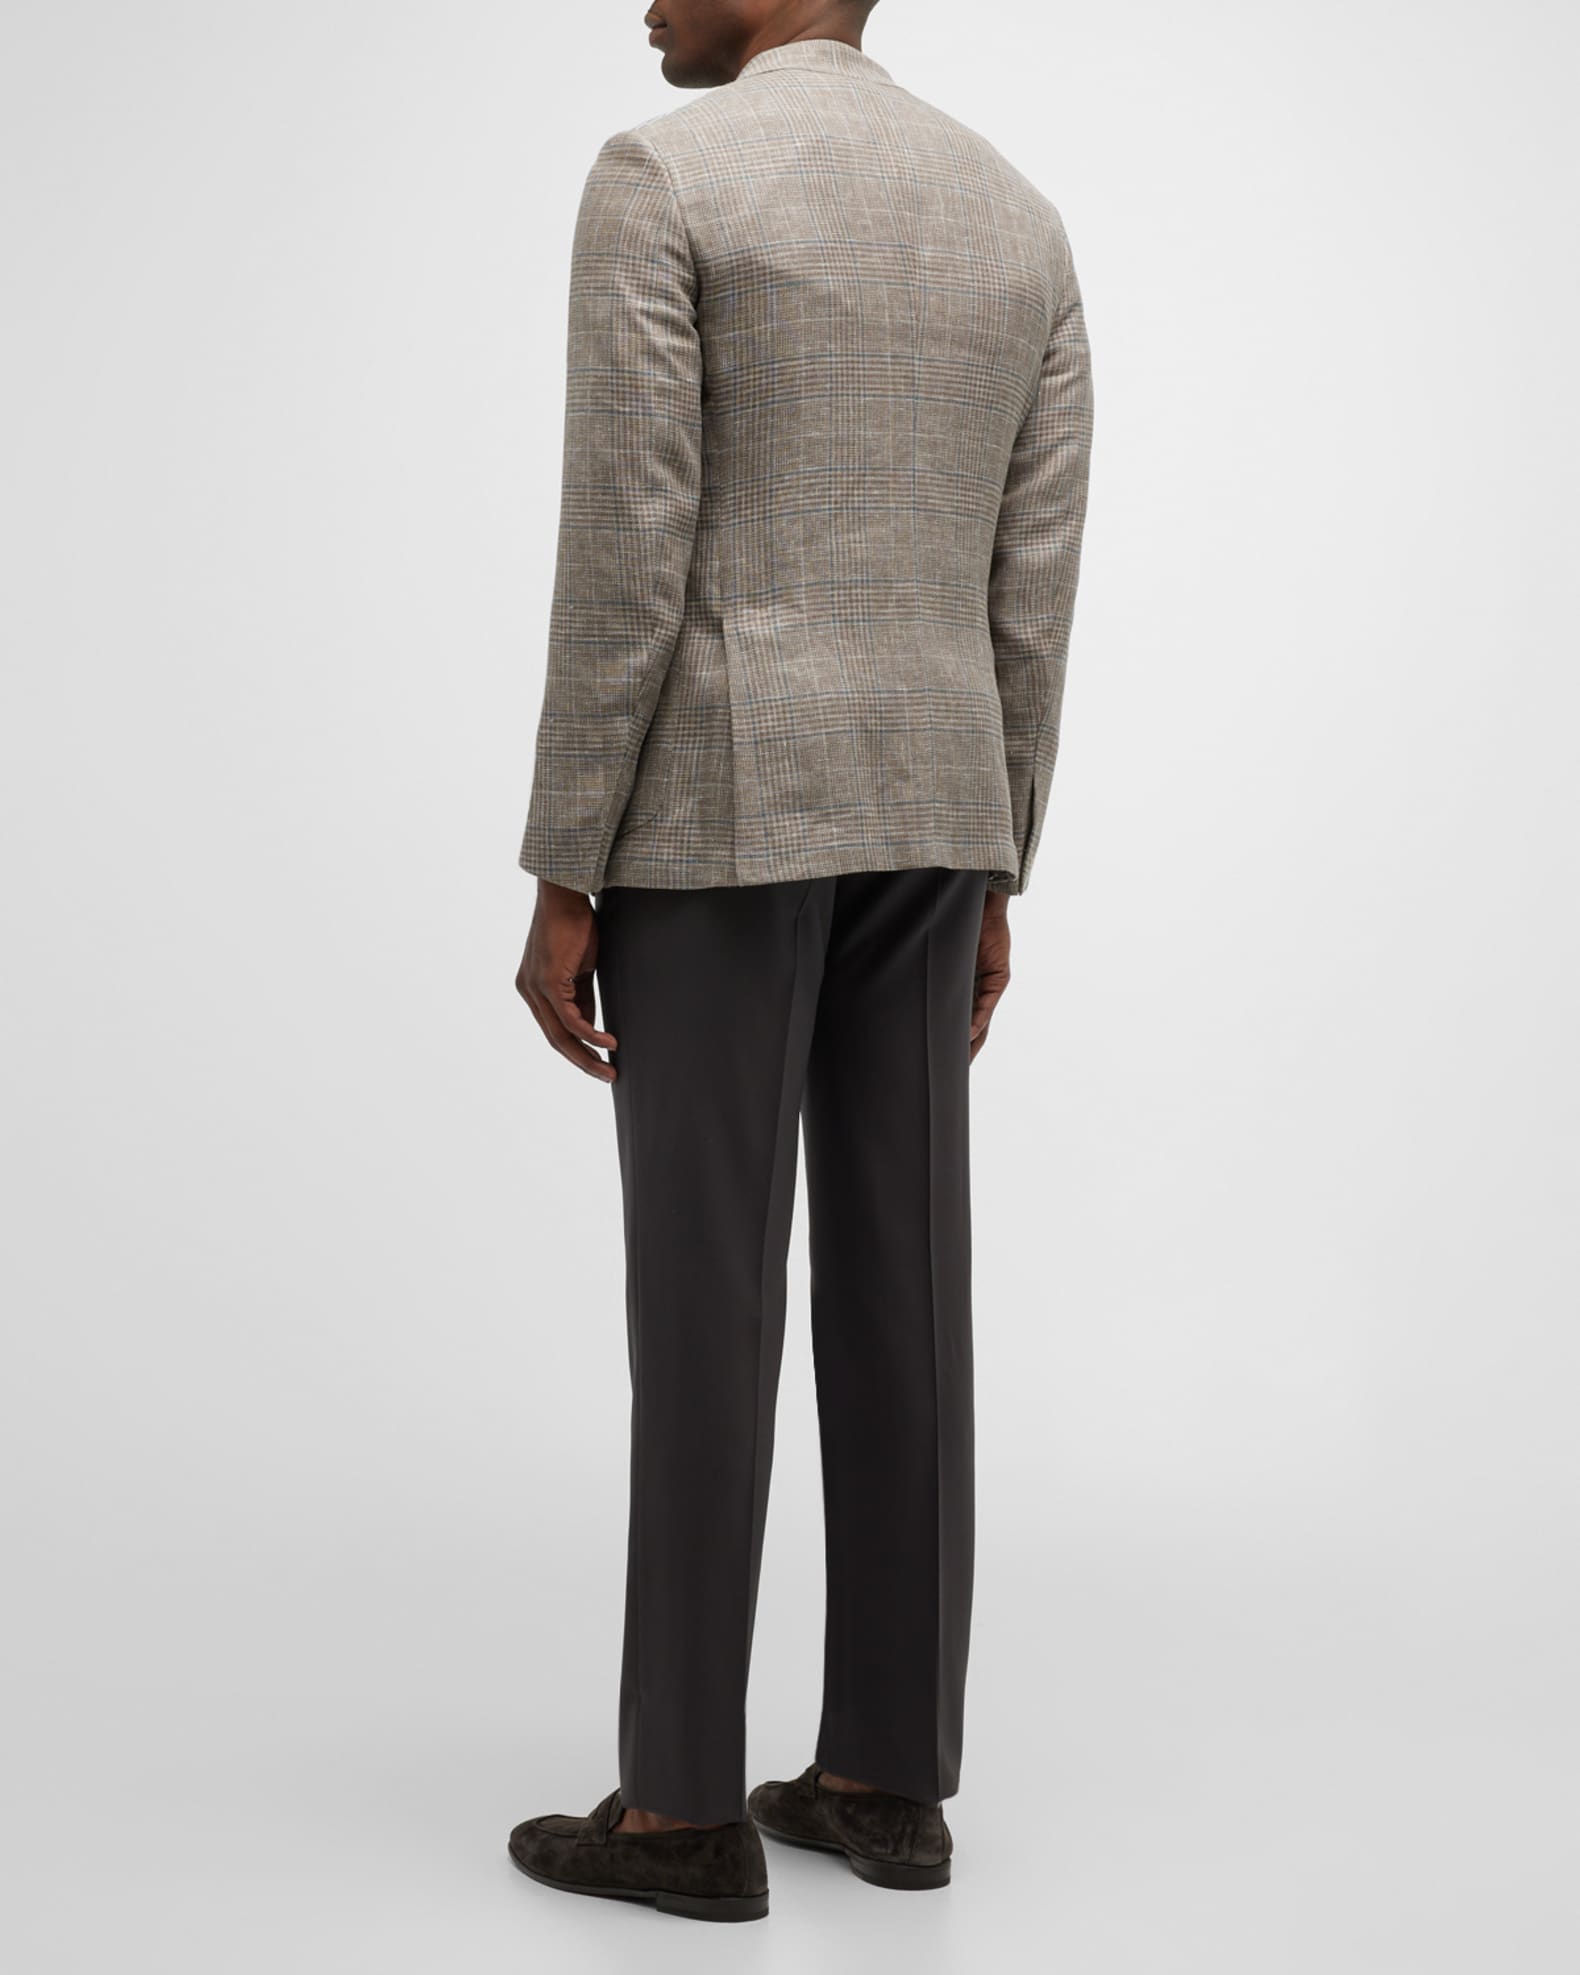 ZEGNA Men's Prince of Wales Single-Breasted Sport Coat | Neiman Marcus